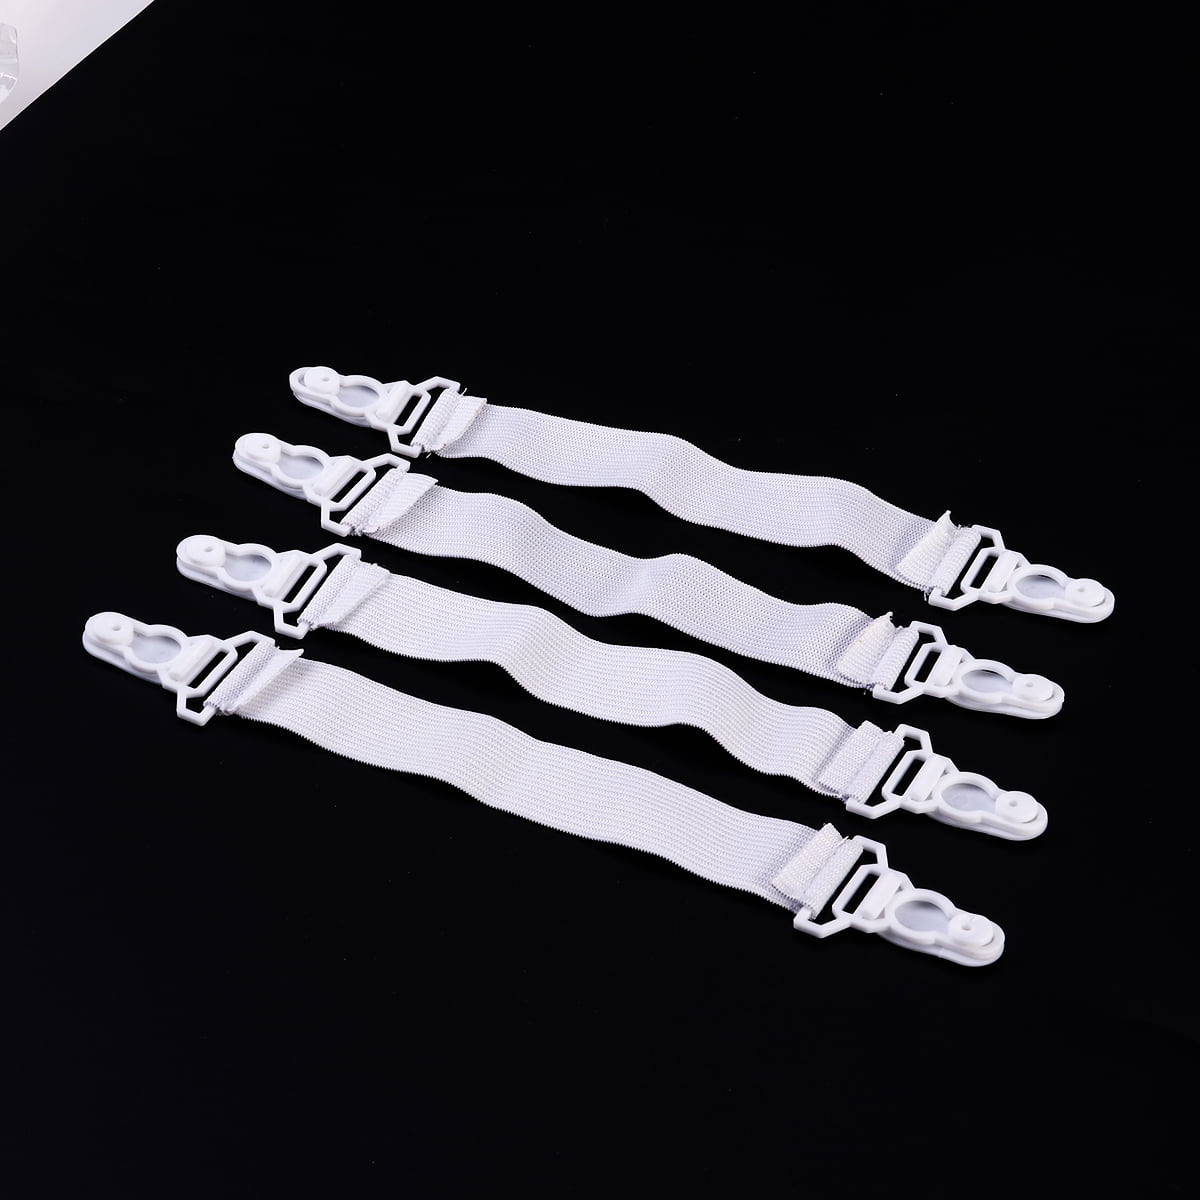 White IMIKEYA 4pcs Garter Style Elastic Bed Sheet Grippers Garter Fastener Straps with Rubber Button Hook & Clasp